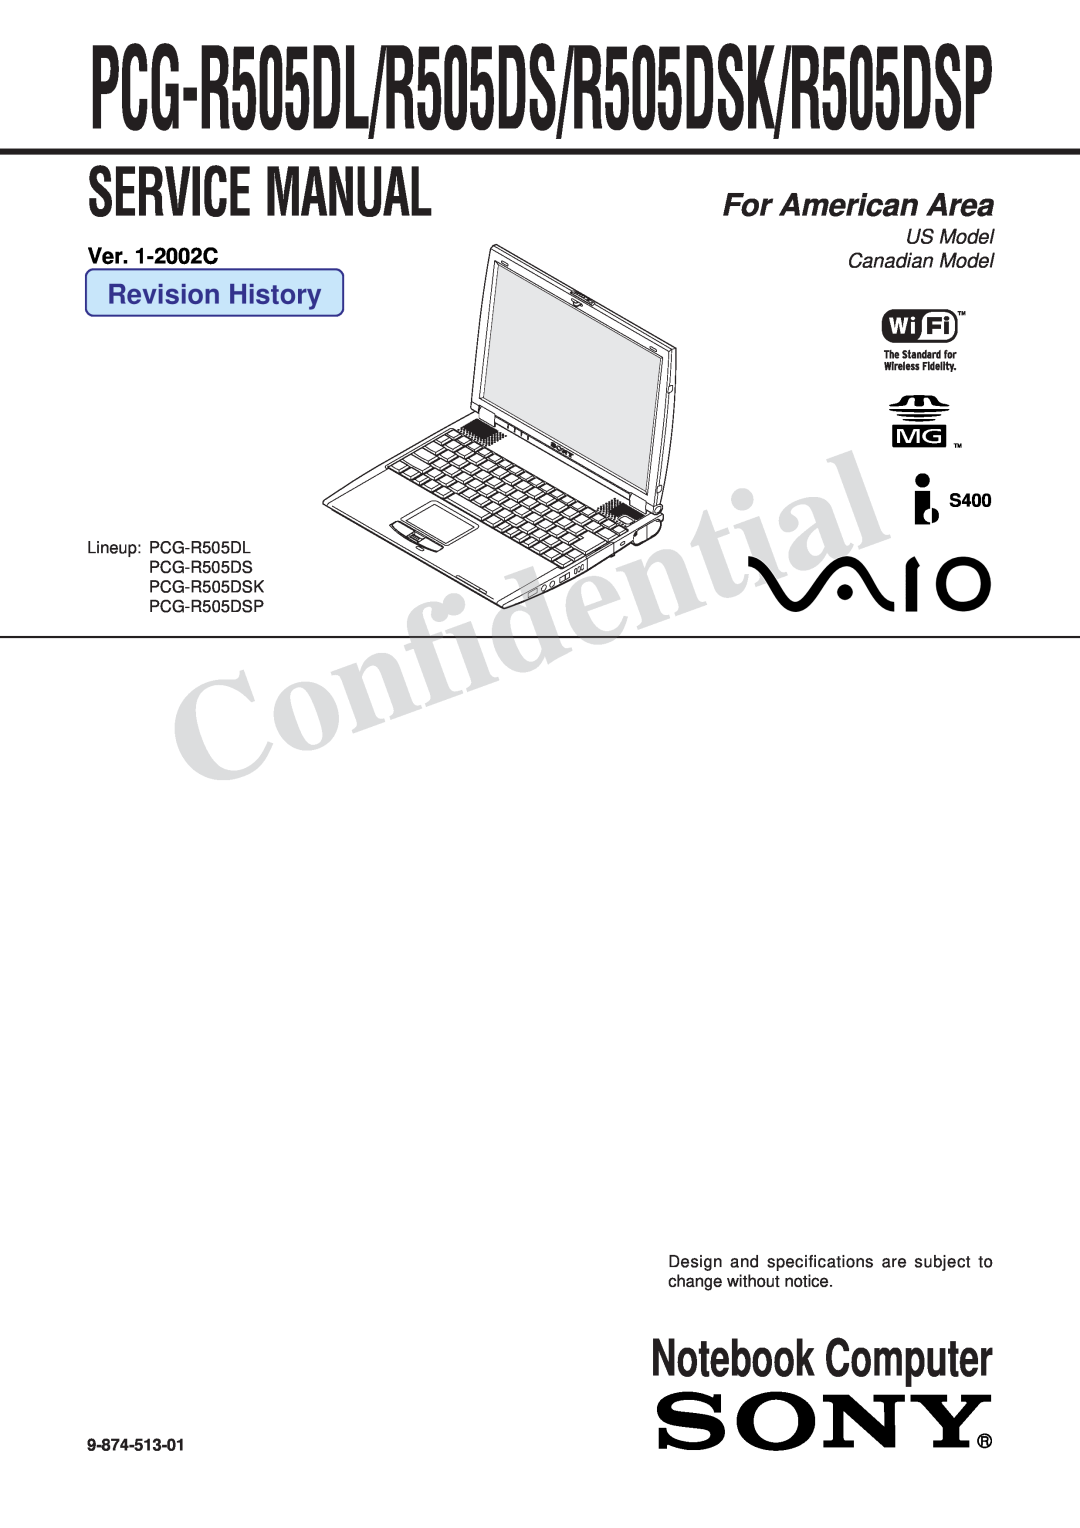 Sony PCG-R505DS specifications R505DS R505DSK R505DSP, Sony VAIO R505 SuperSlim Pro Notebook, MB SDRAM/40.0 GB3 hard drive 